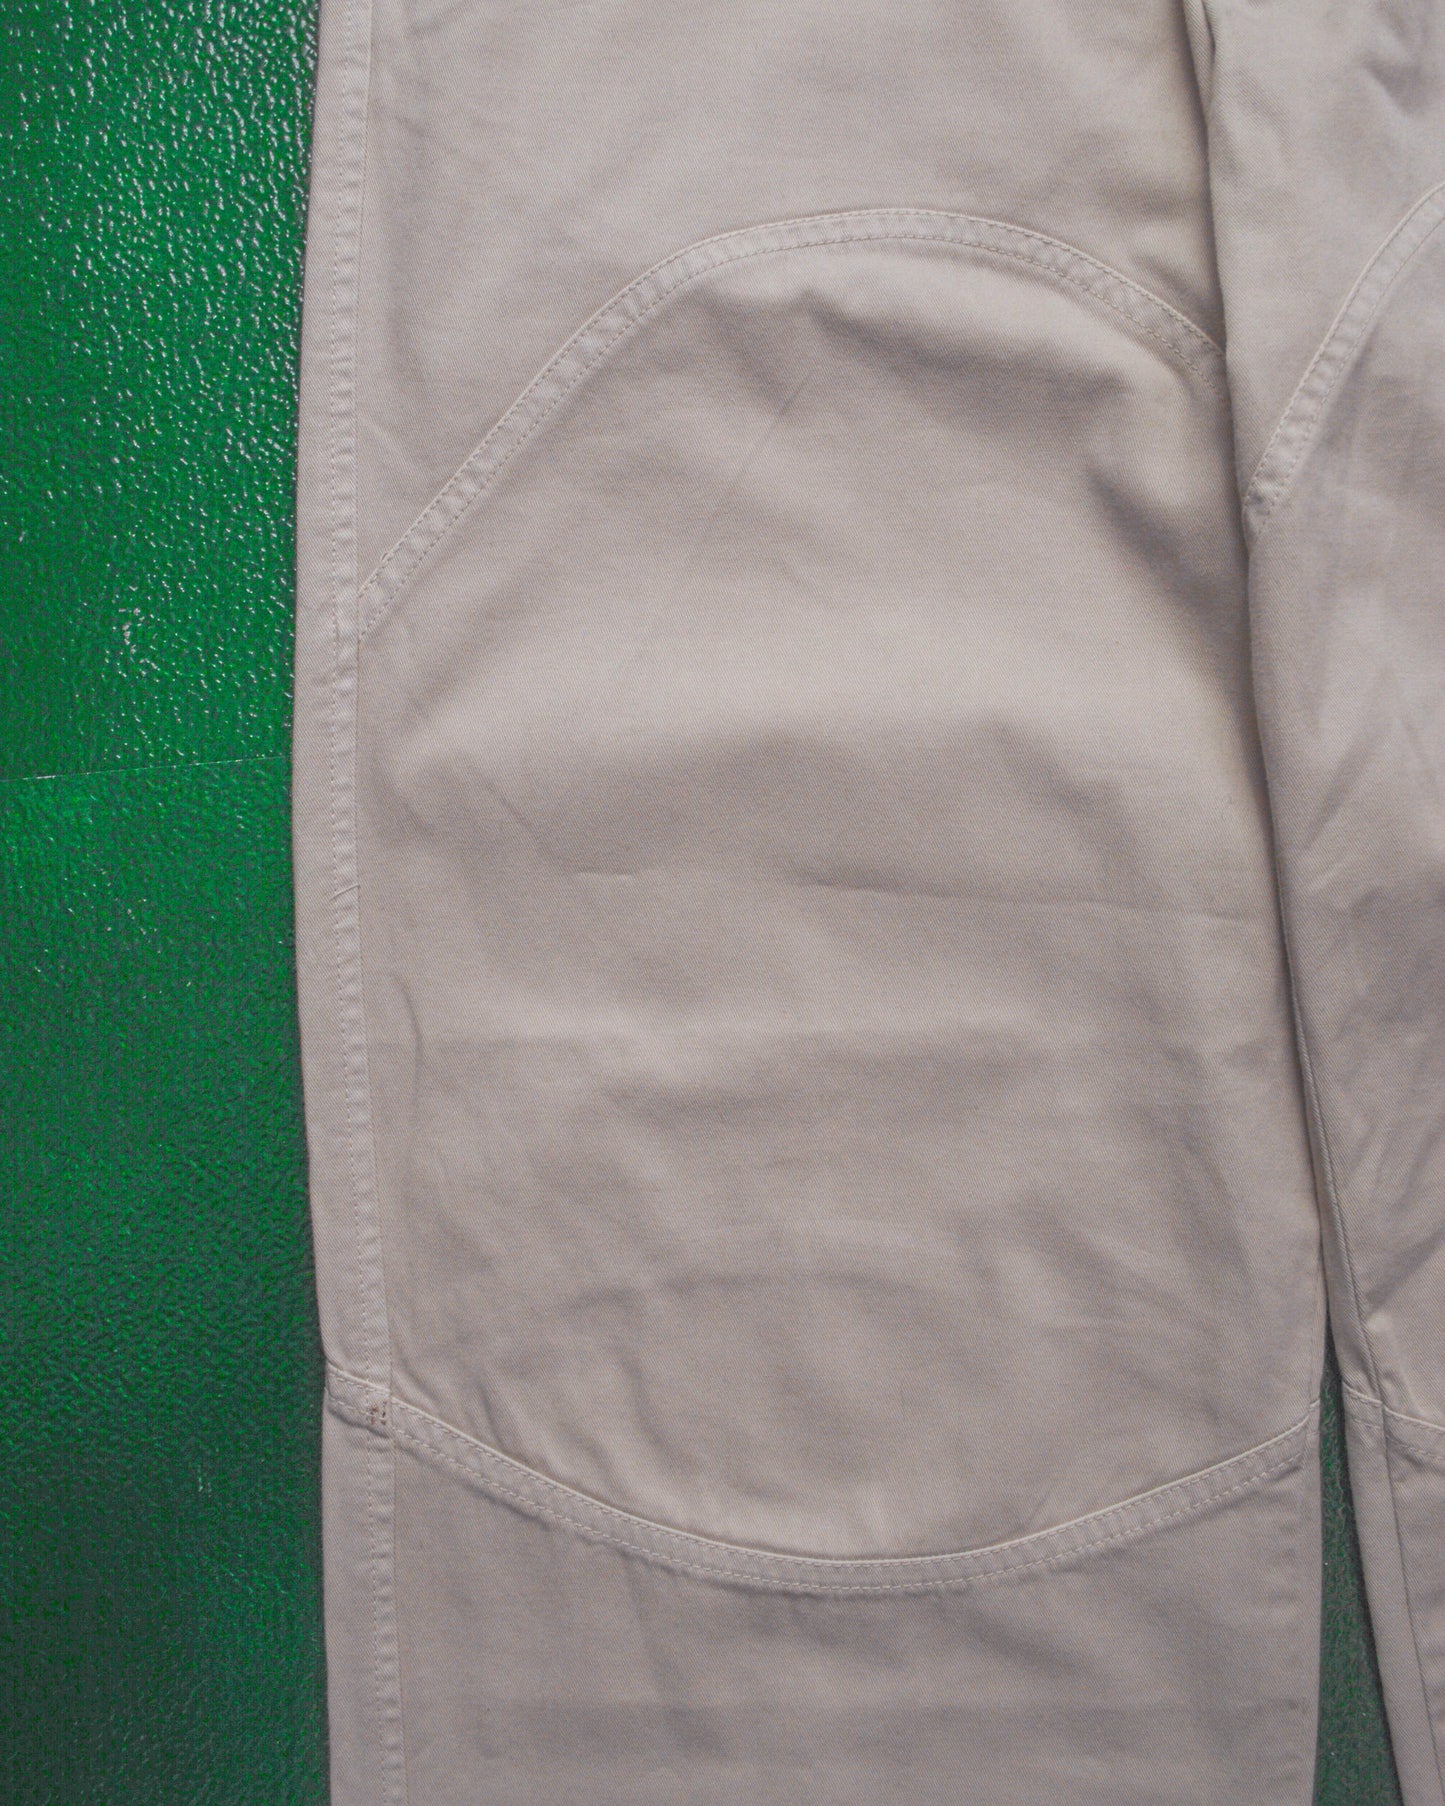 Early 2000s Round Knee Panelled Cream Pants (~32~)